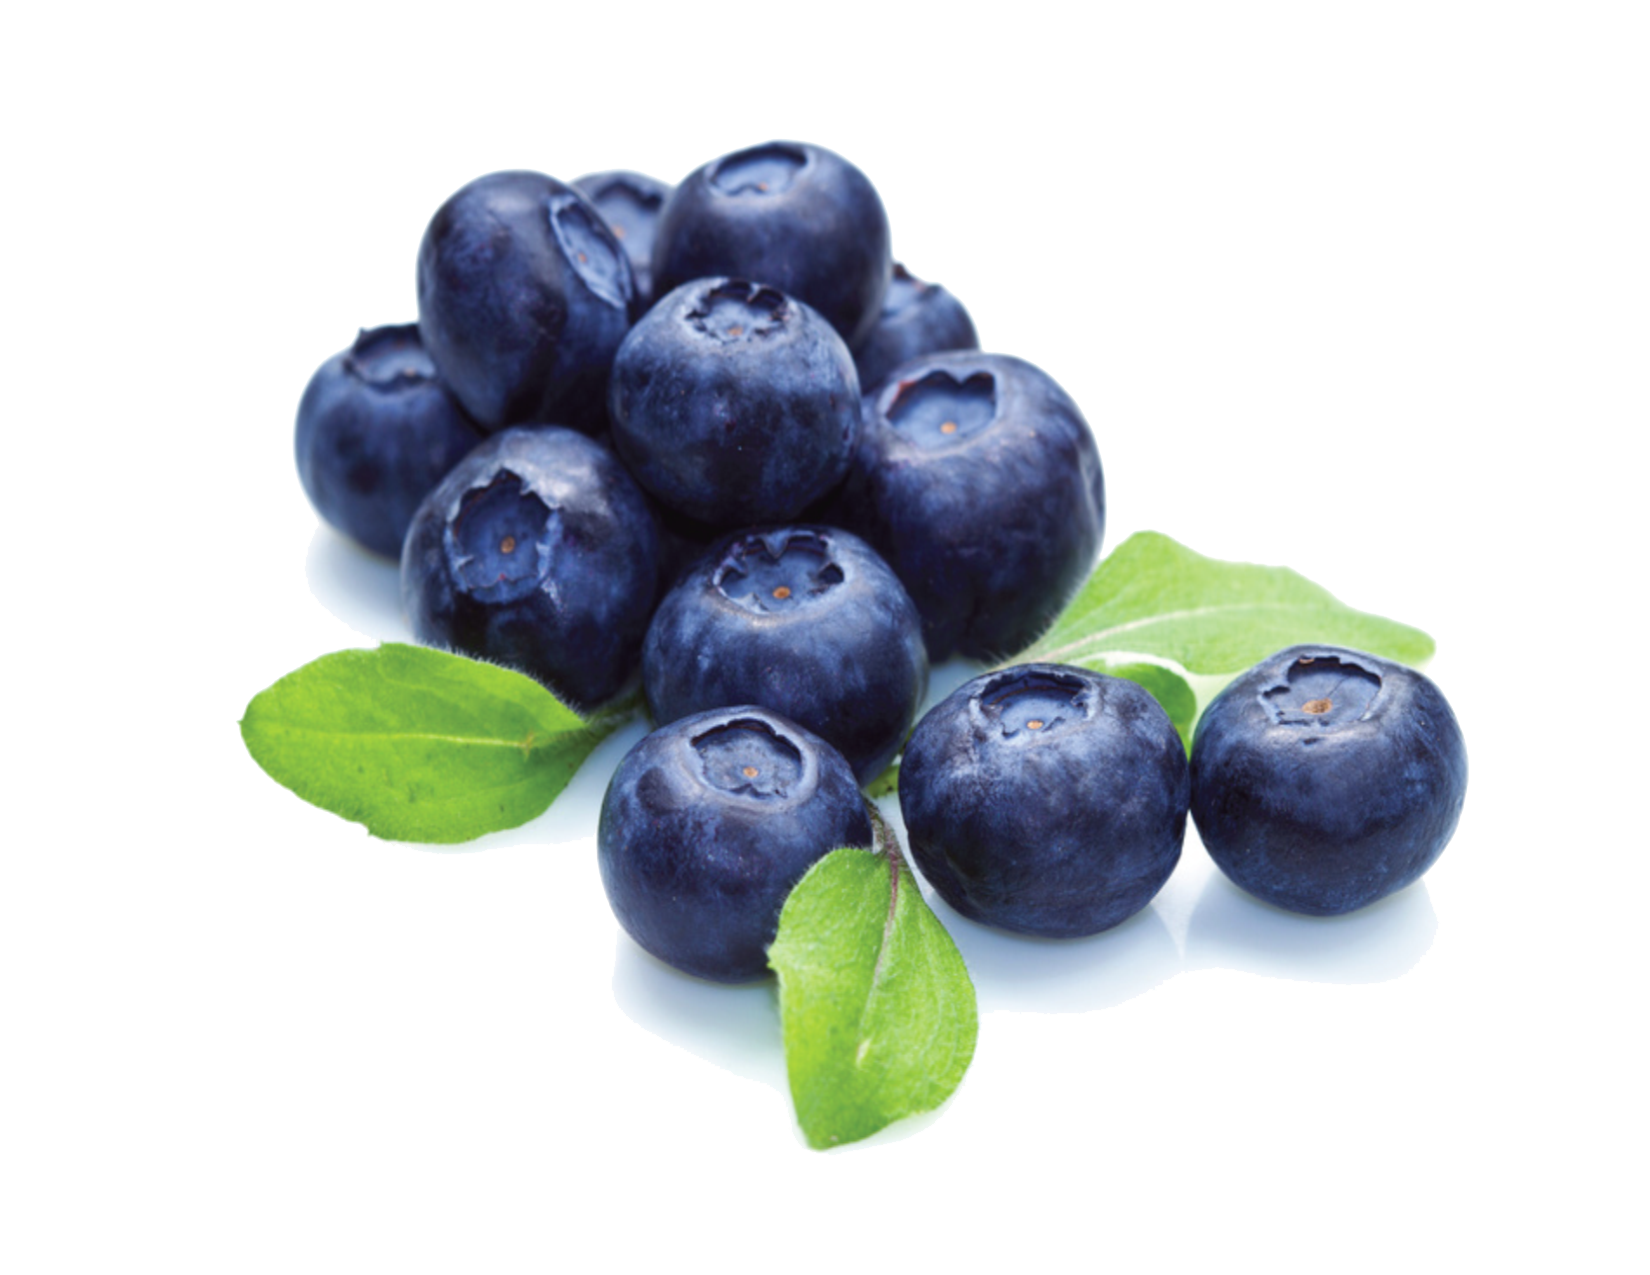 Blueberry png images transparent. Blueberries clipart huckleberry